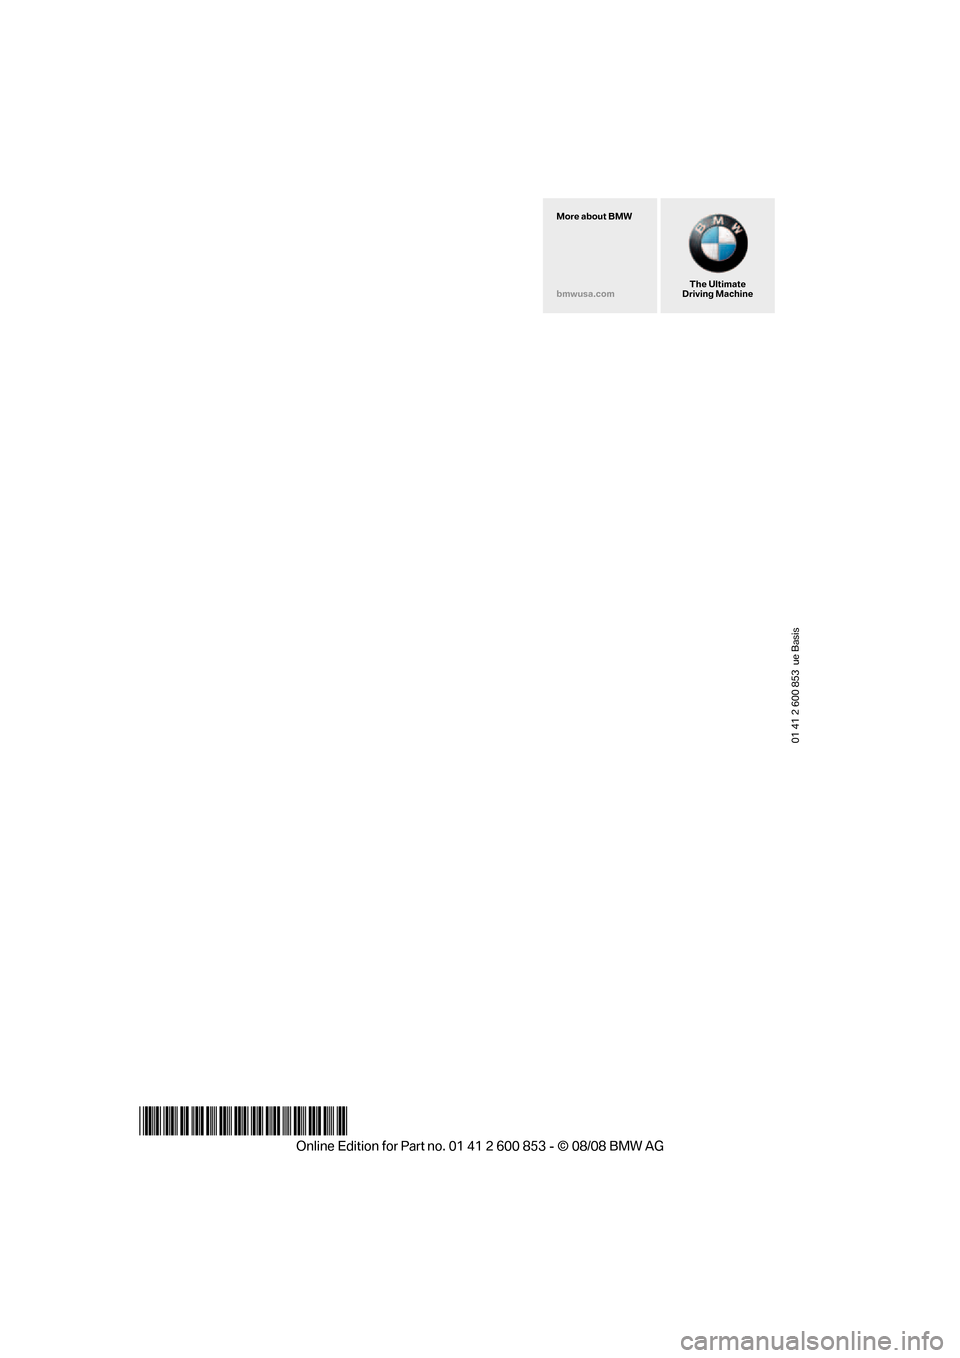 BMW 128I 2009 E88 Owners Manual 01 41 2 600 853  ue Basis
*BL260085300W*
The Ultimate
Driving Machine More about BMW
bmwusa.com 